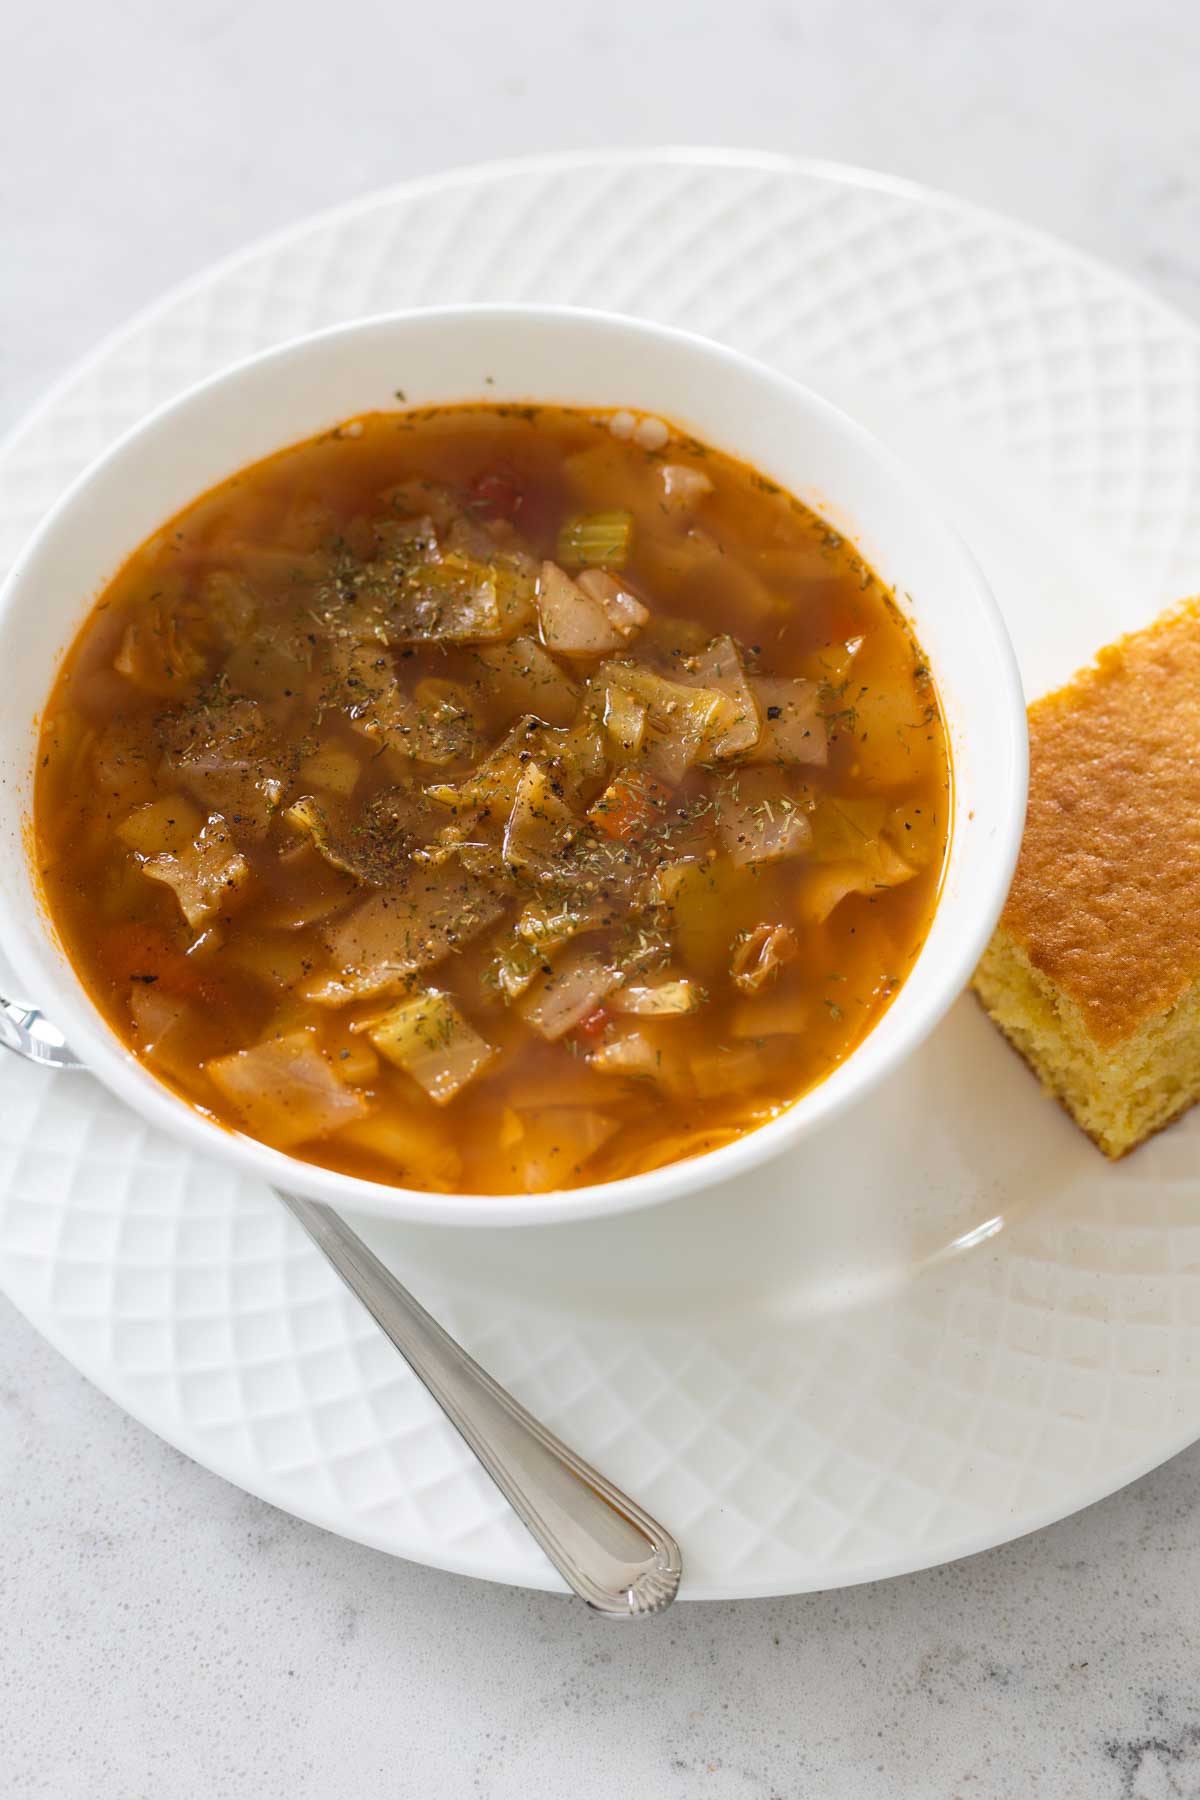 The sweet and sour cabbage soup is in a white soup bowl with a piece of cornbread on the side.